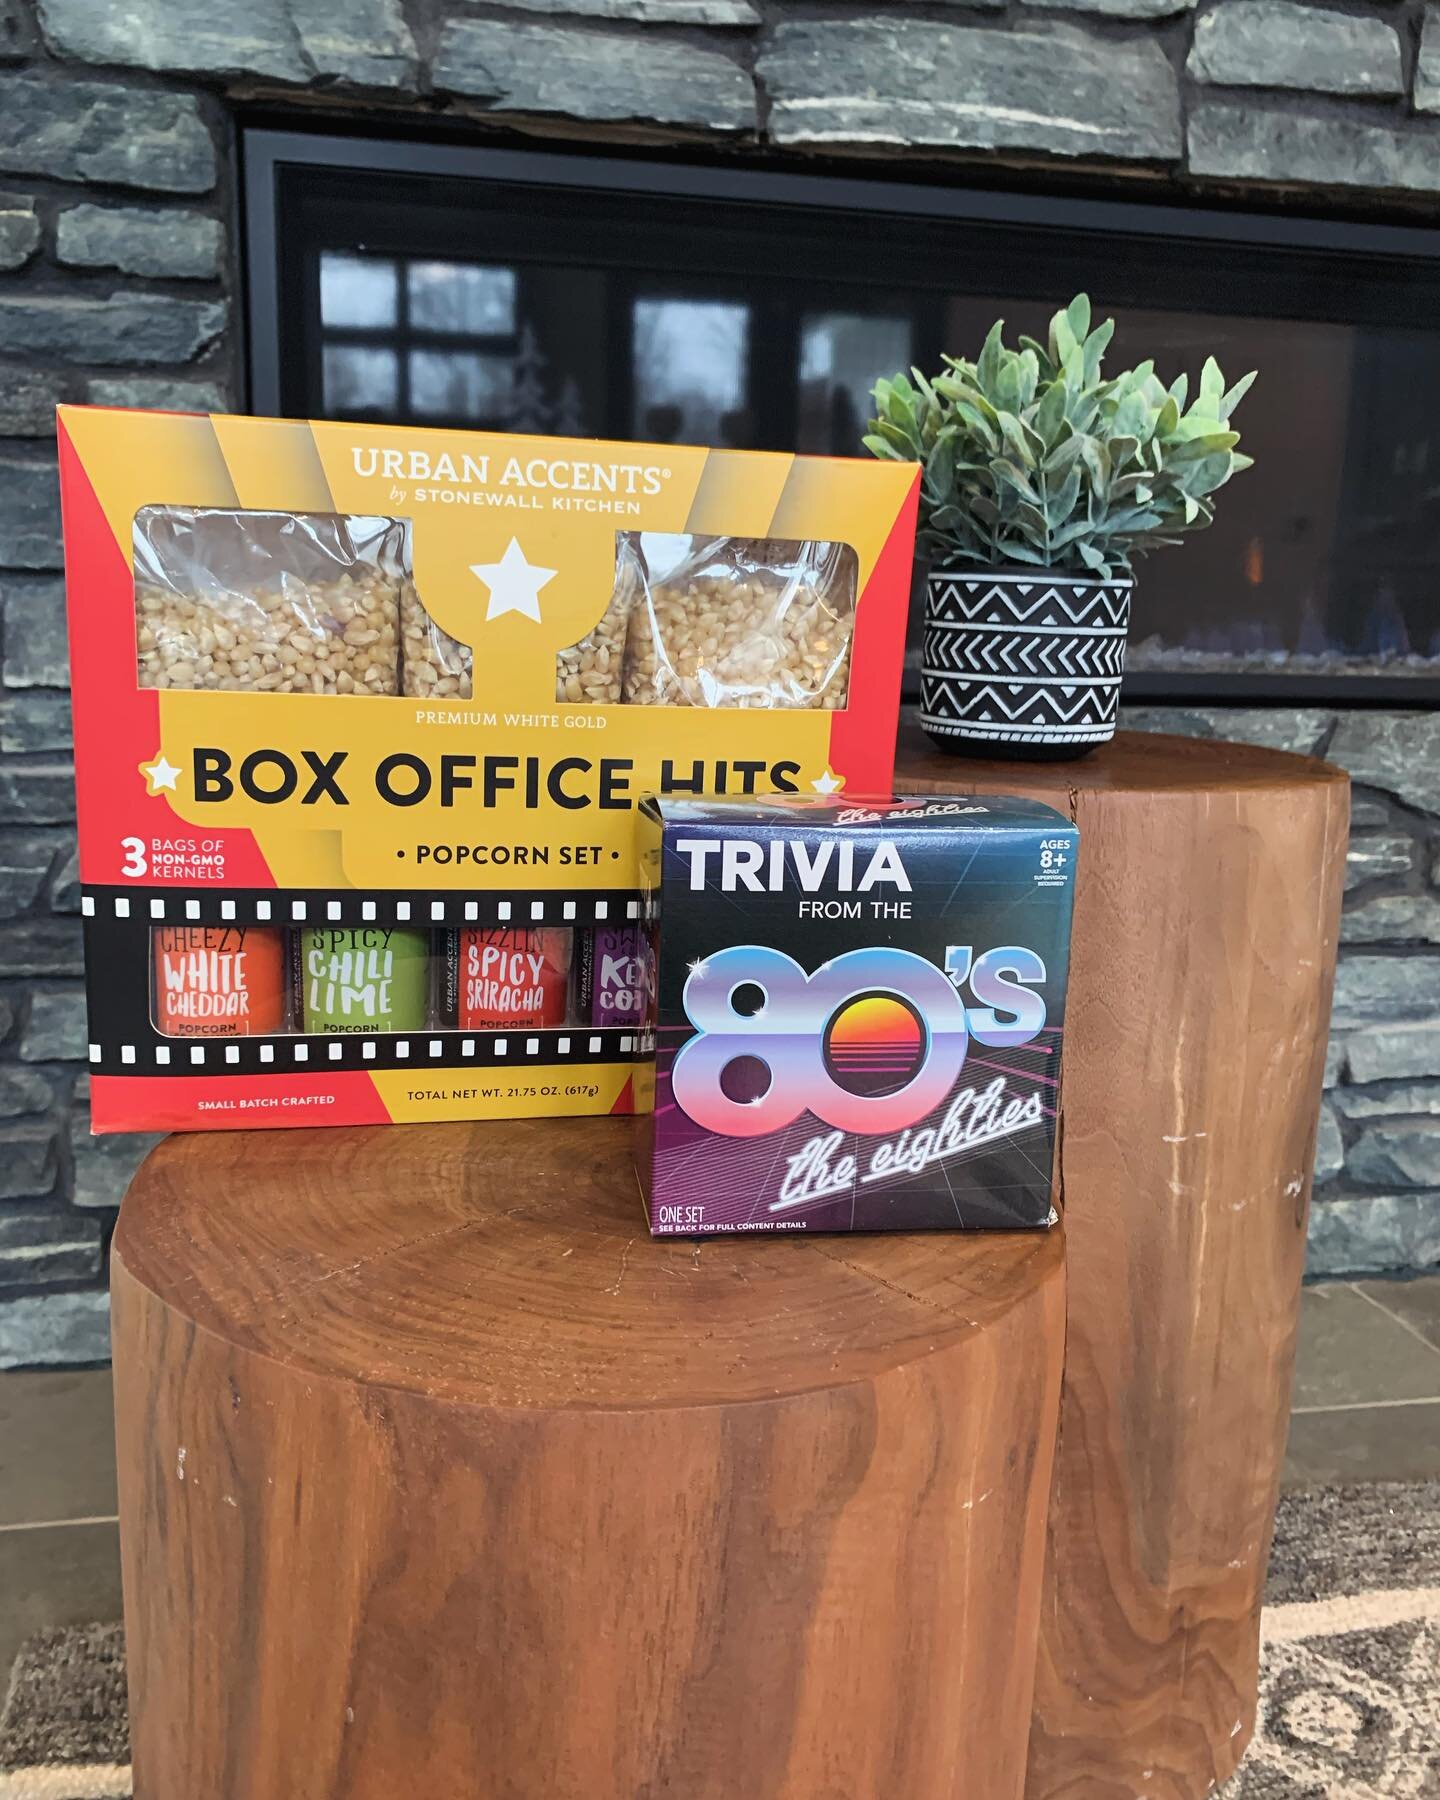 In honor of&hellip; absolutely nothing in particular (except my personal love of popcorn nights with Trivia!) we&rsquo;re doing a giveaway of Popcorn and Trivia!! Hooray! 

How to enter:
🍿Like this Post
🍿Comment your favorite Trivia Categories 
🍿T